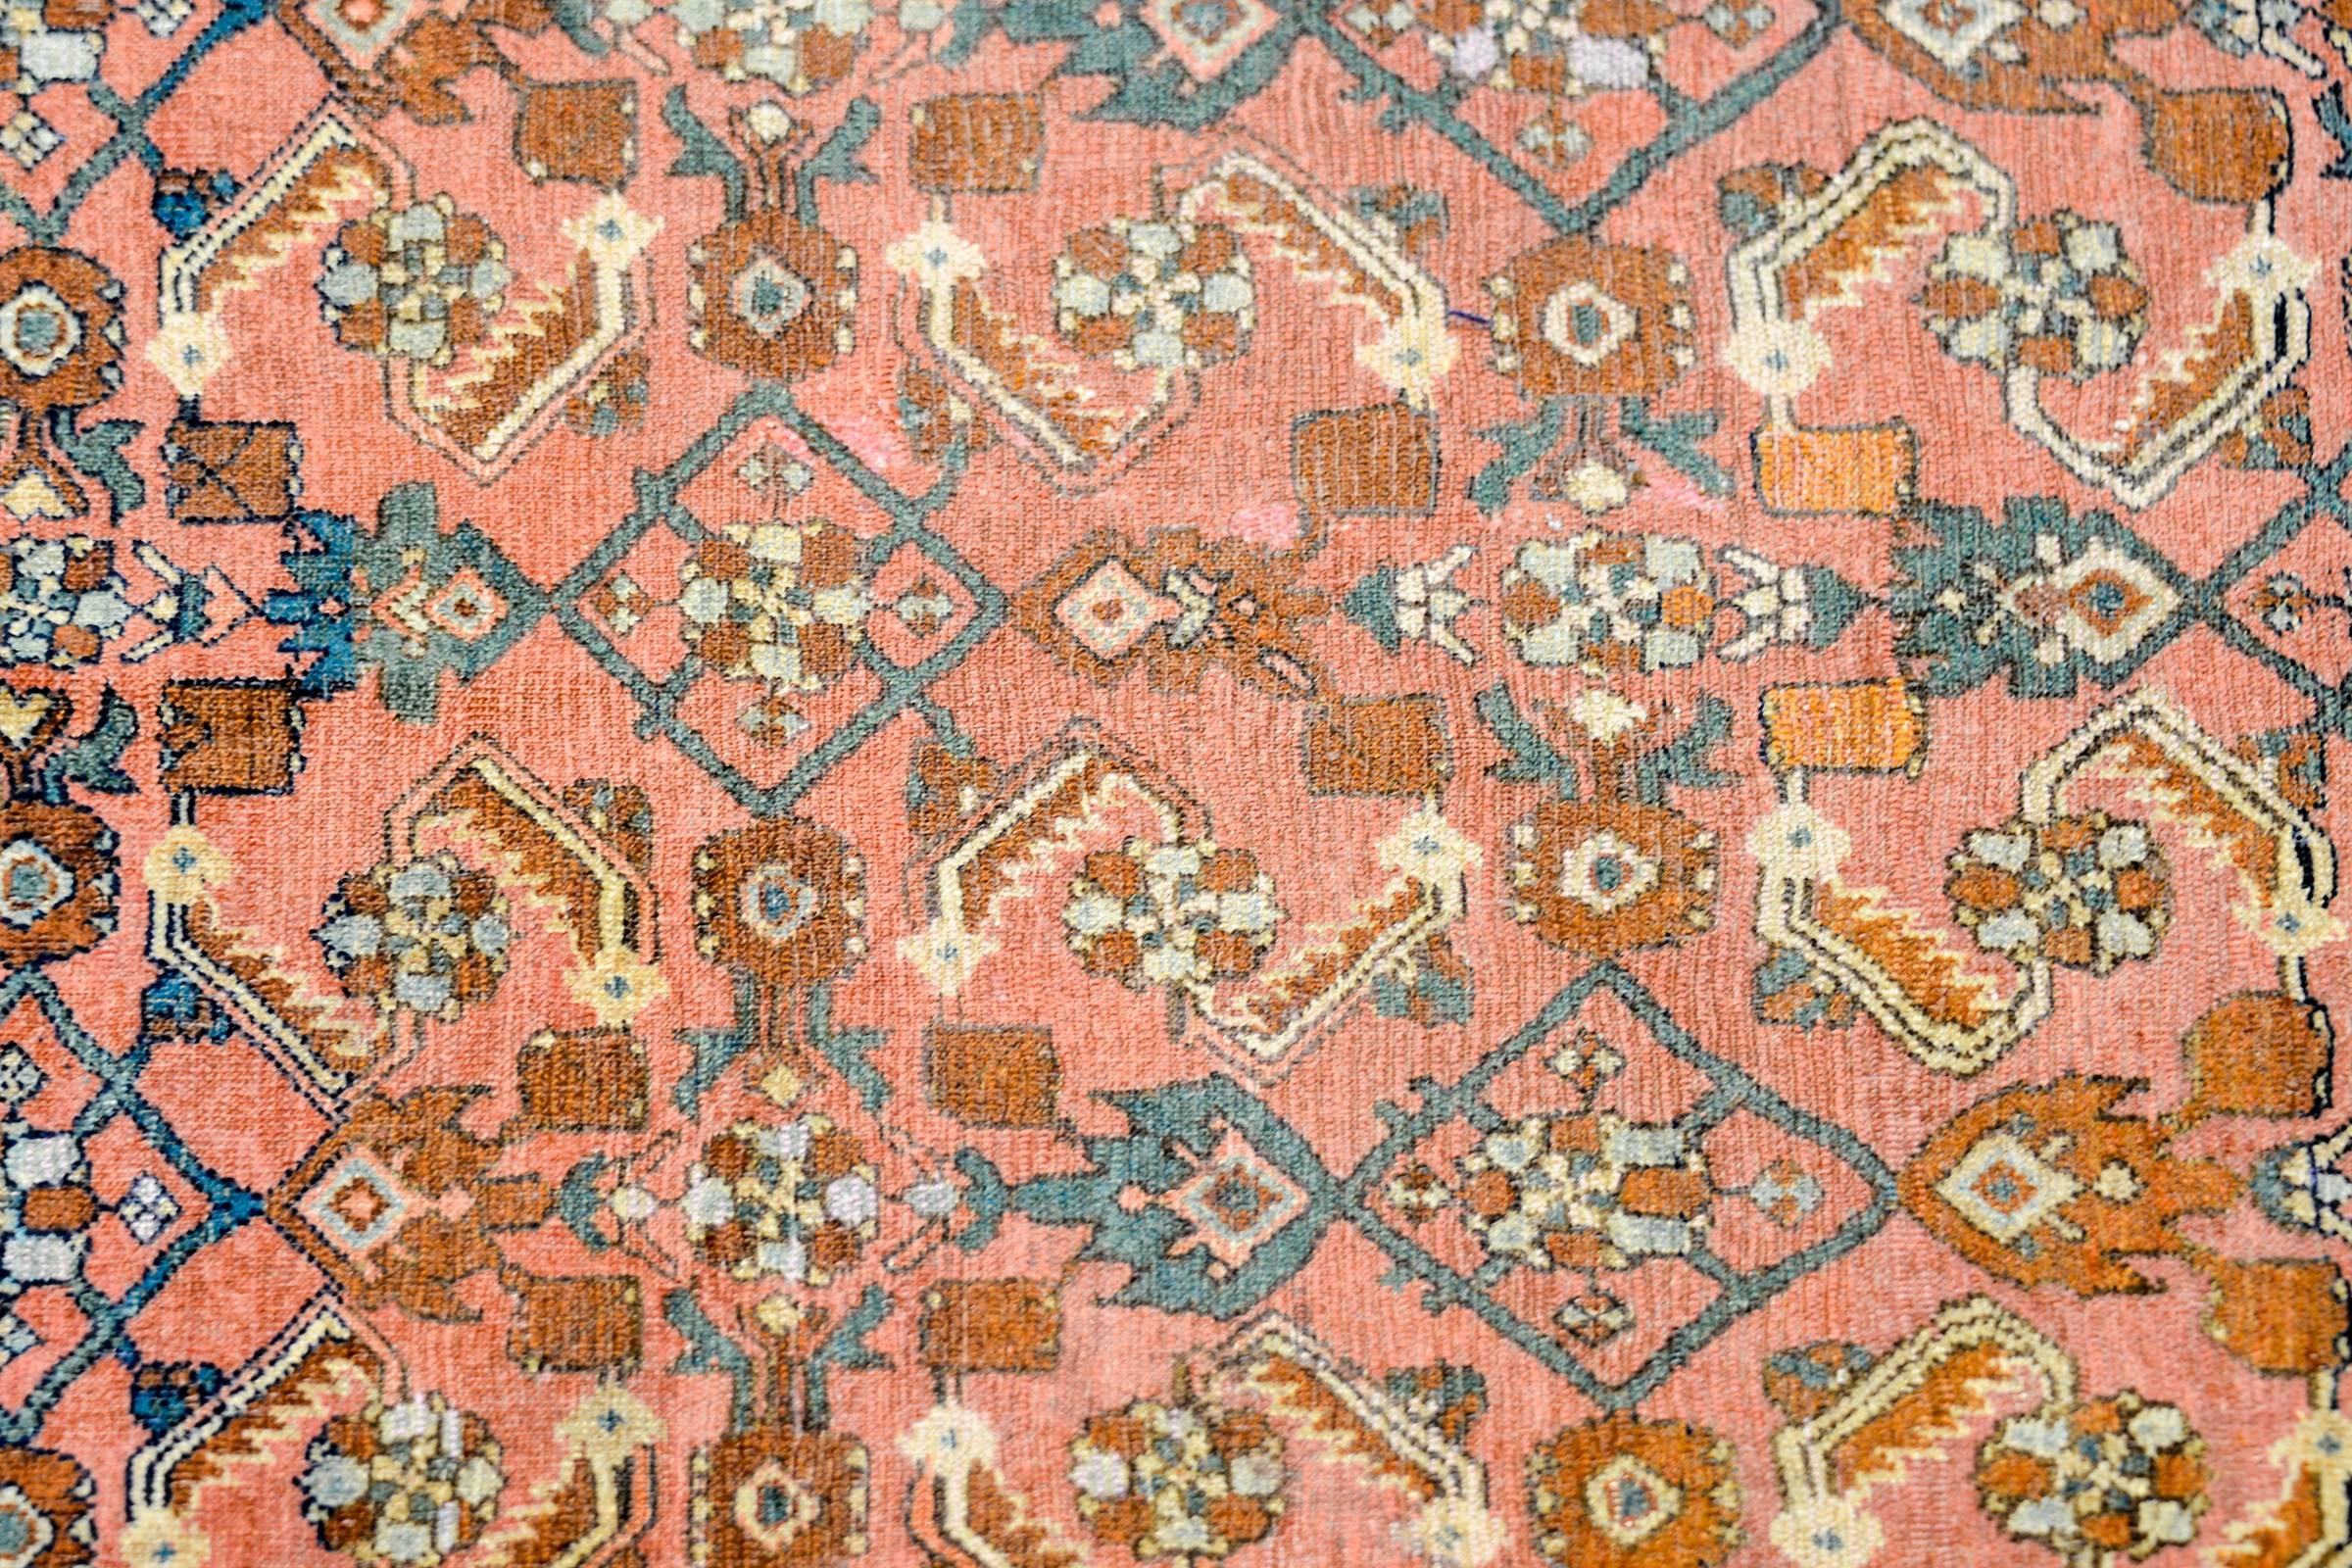 A late 19th century Persian Malayer rug with all-over multicolored trellised floral and vine pattern woven in indigo, crimson, and cream colored wool, on a coral colored background. The border is composed with one central floral stripe on an indigo